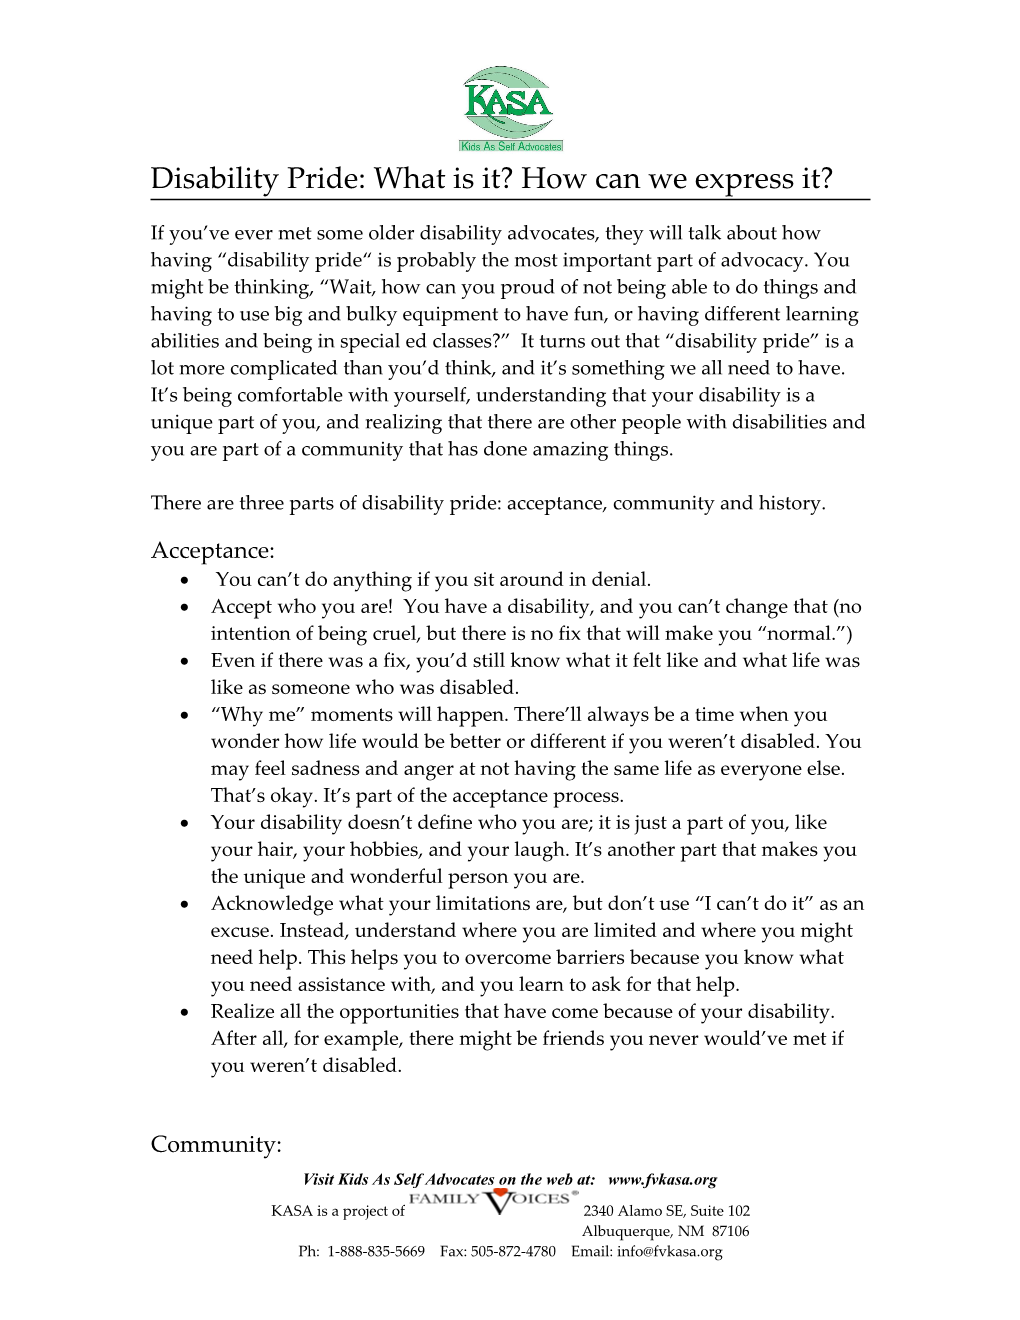 Disability Pride: What Is It? How Can We Express It?